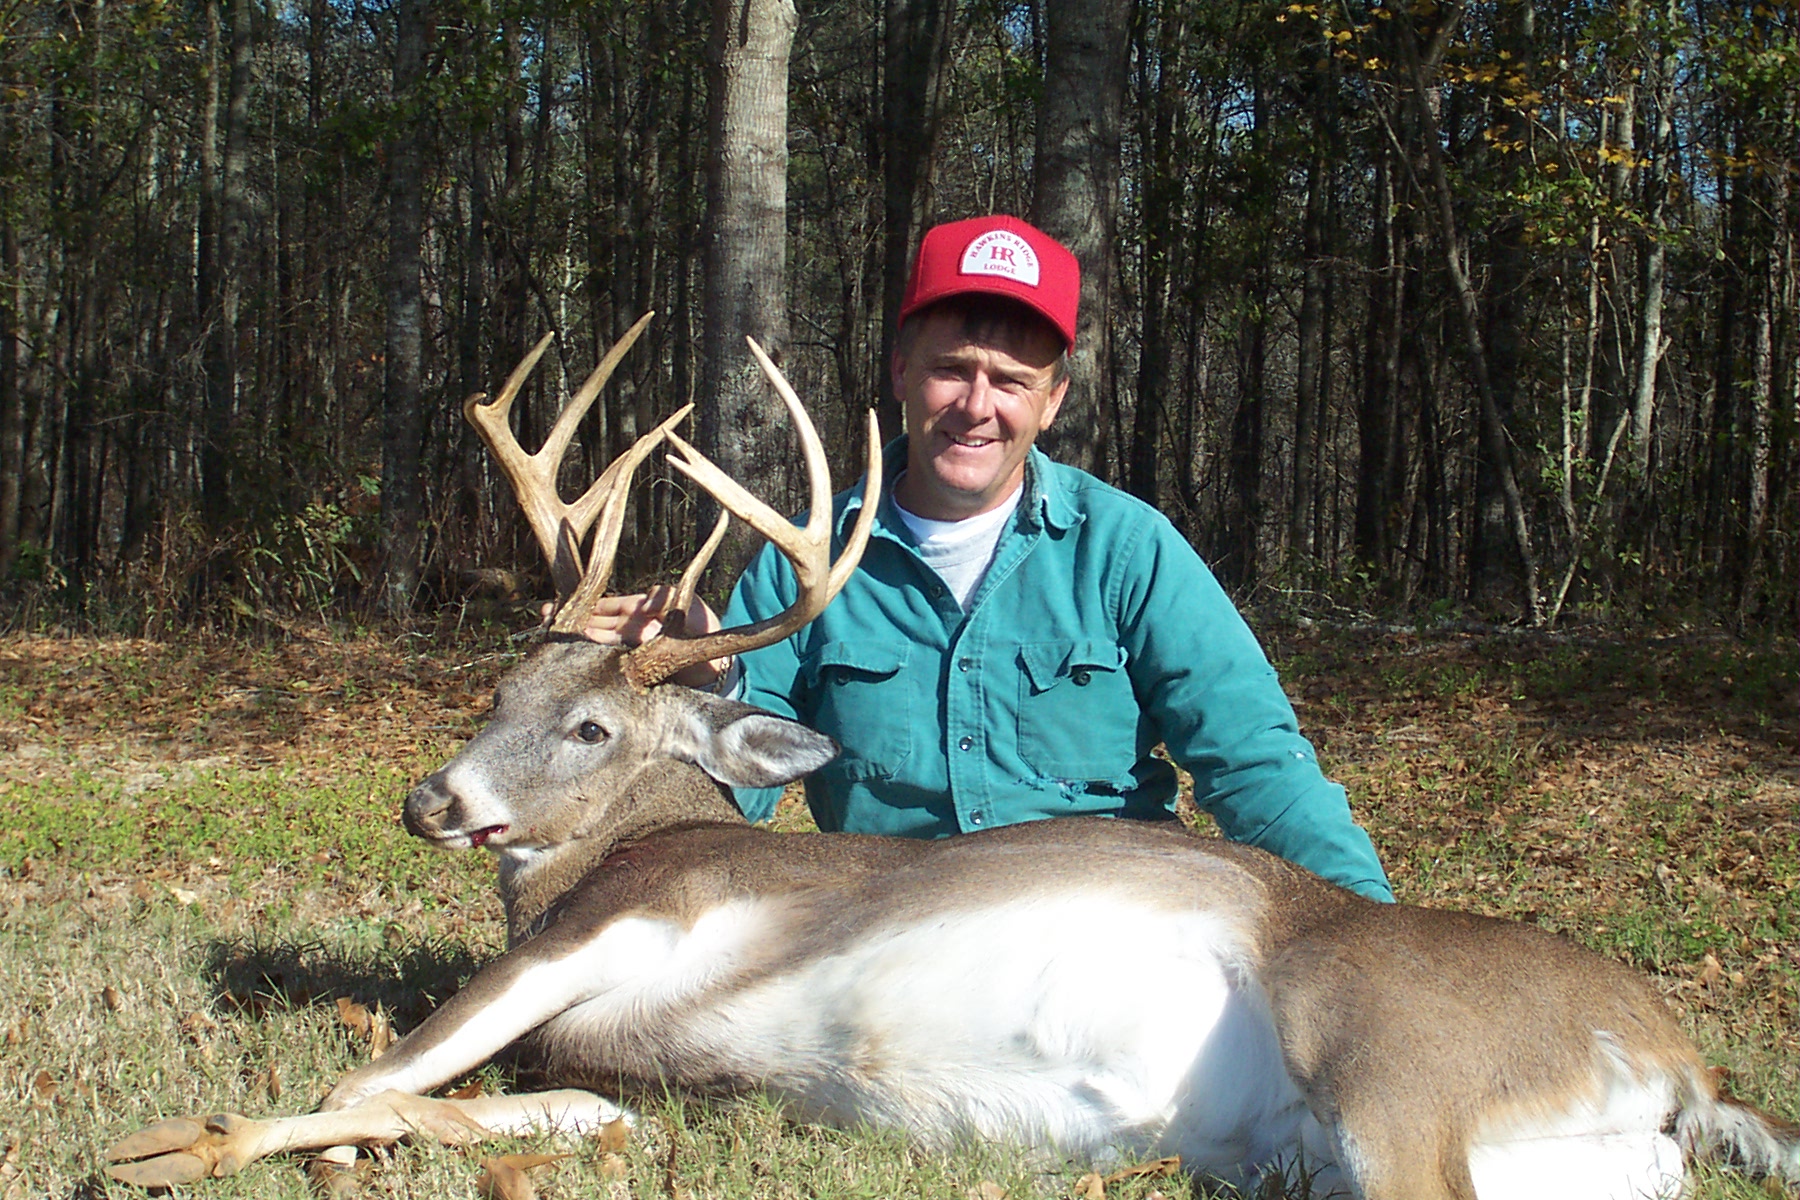 Can You Have A Pet Deer In Alabama Alabama Hunting Photos For Whitetail Deer Turkey Duck Hunts